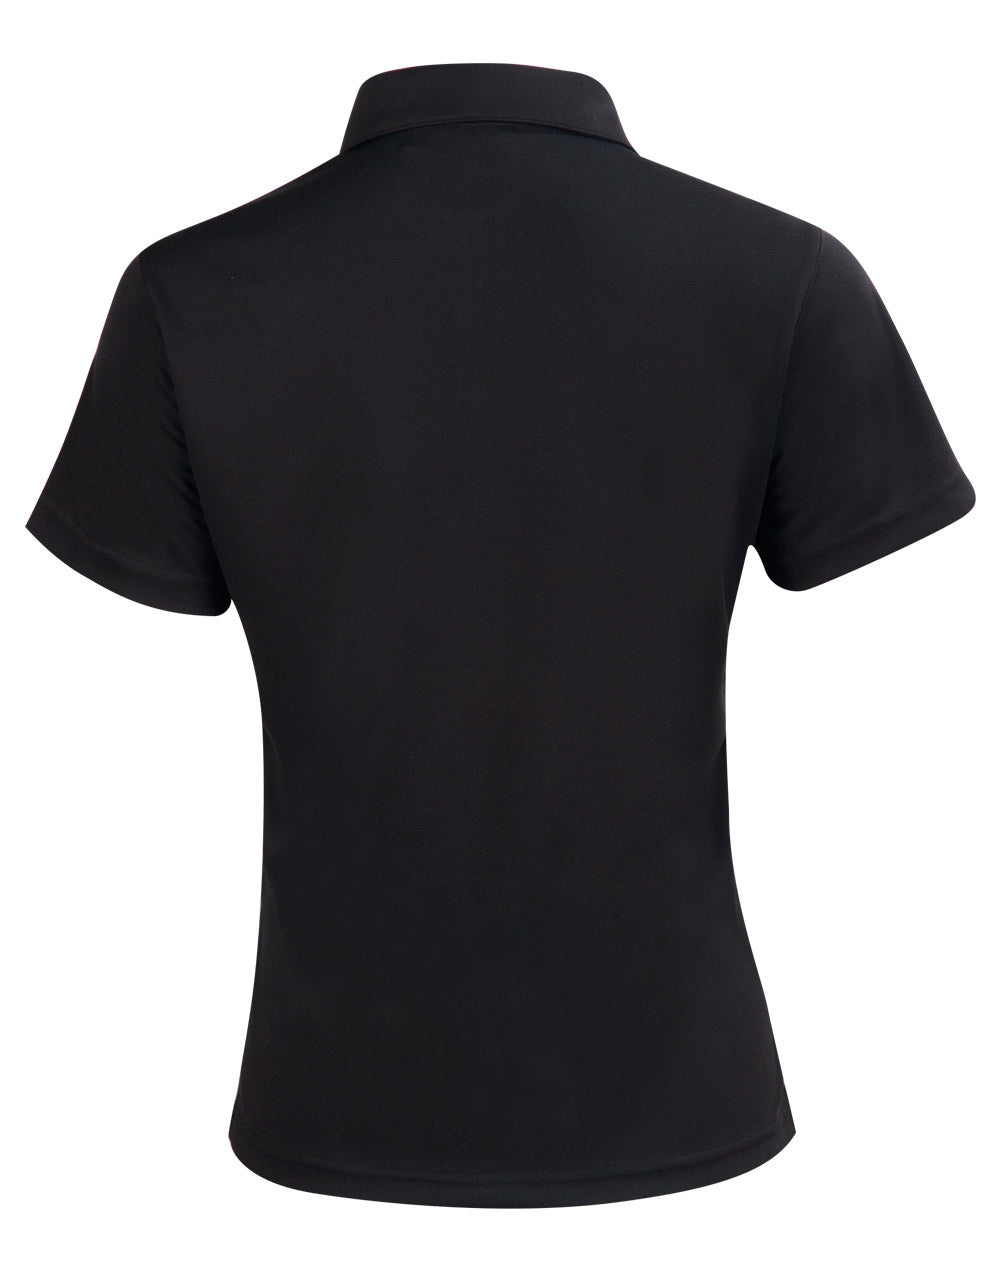 [PS83] Men's Ultra Dry Short Sleeve Contrast Polo